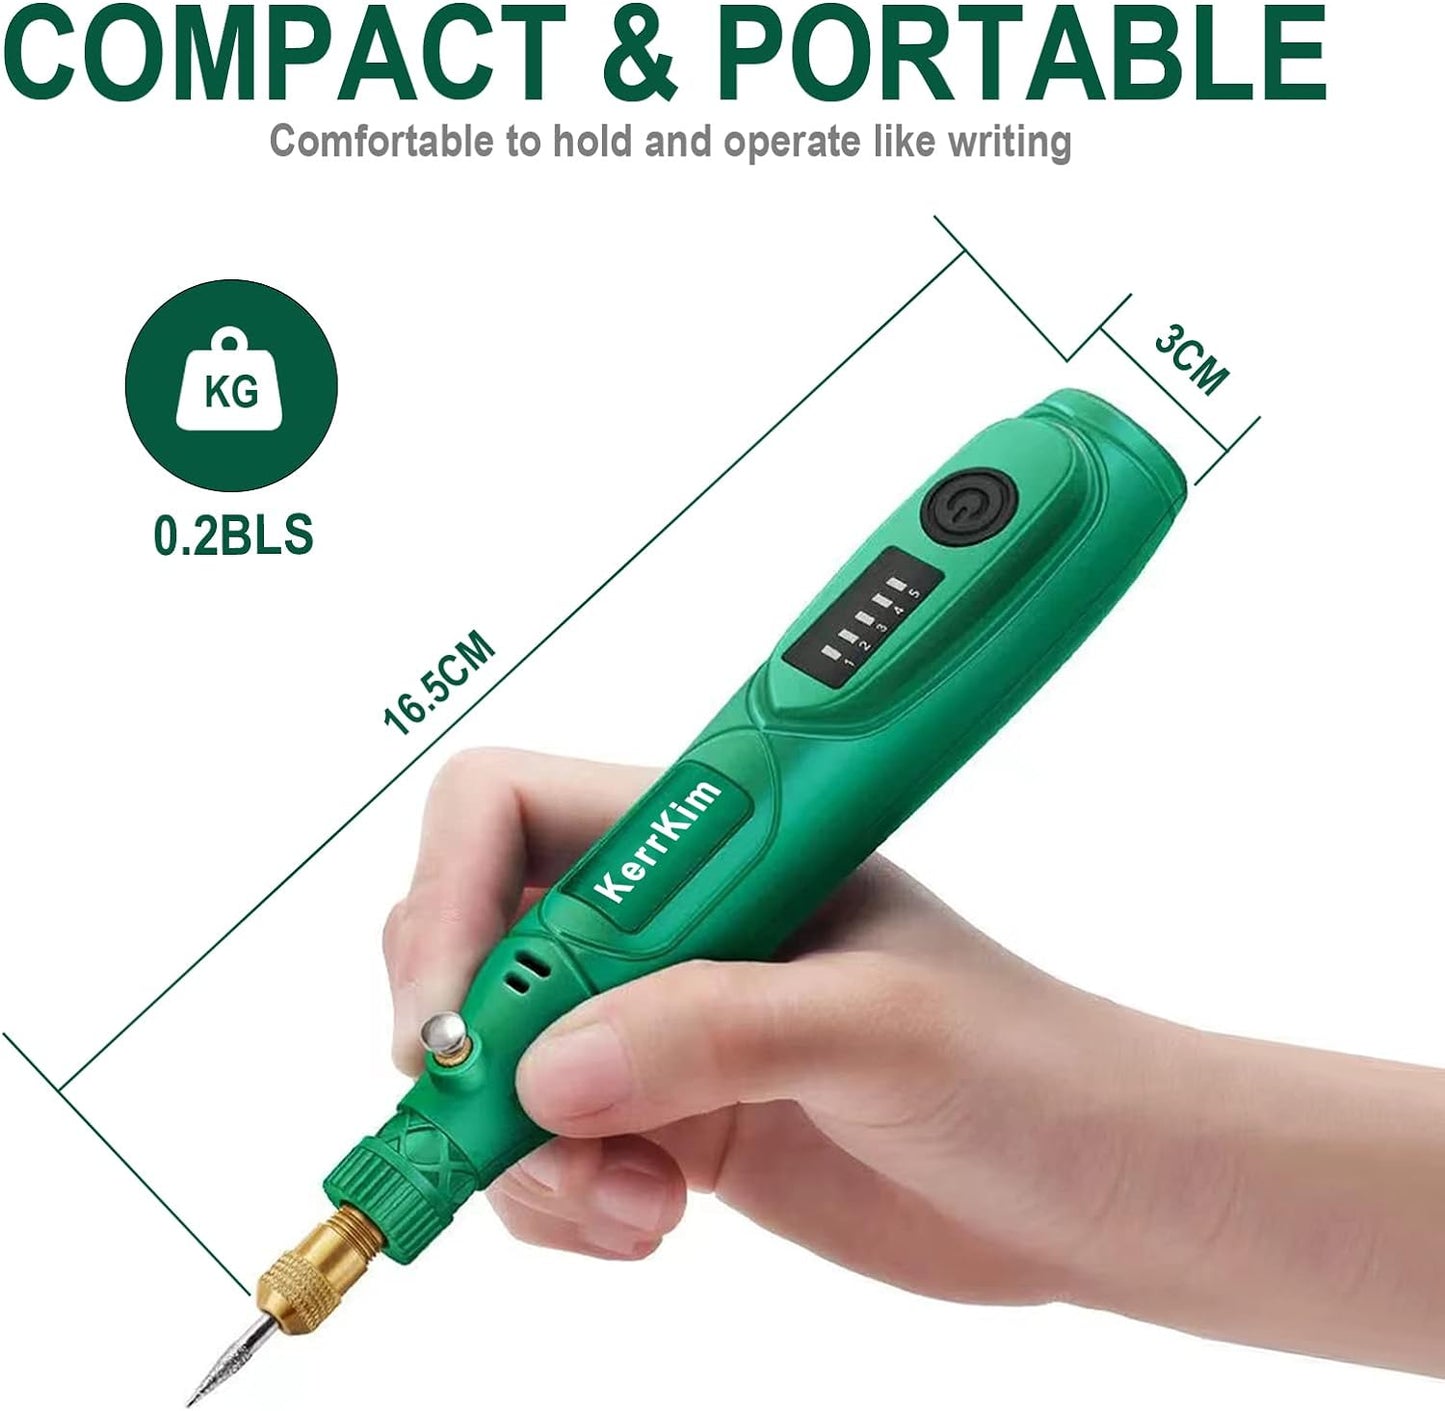 Cordless Rotary Tool, 5Speed, USB charger, 63 Accessories, Sanding Polishing Drilling Engraving